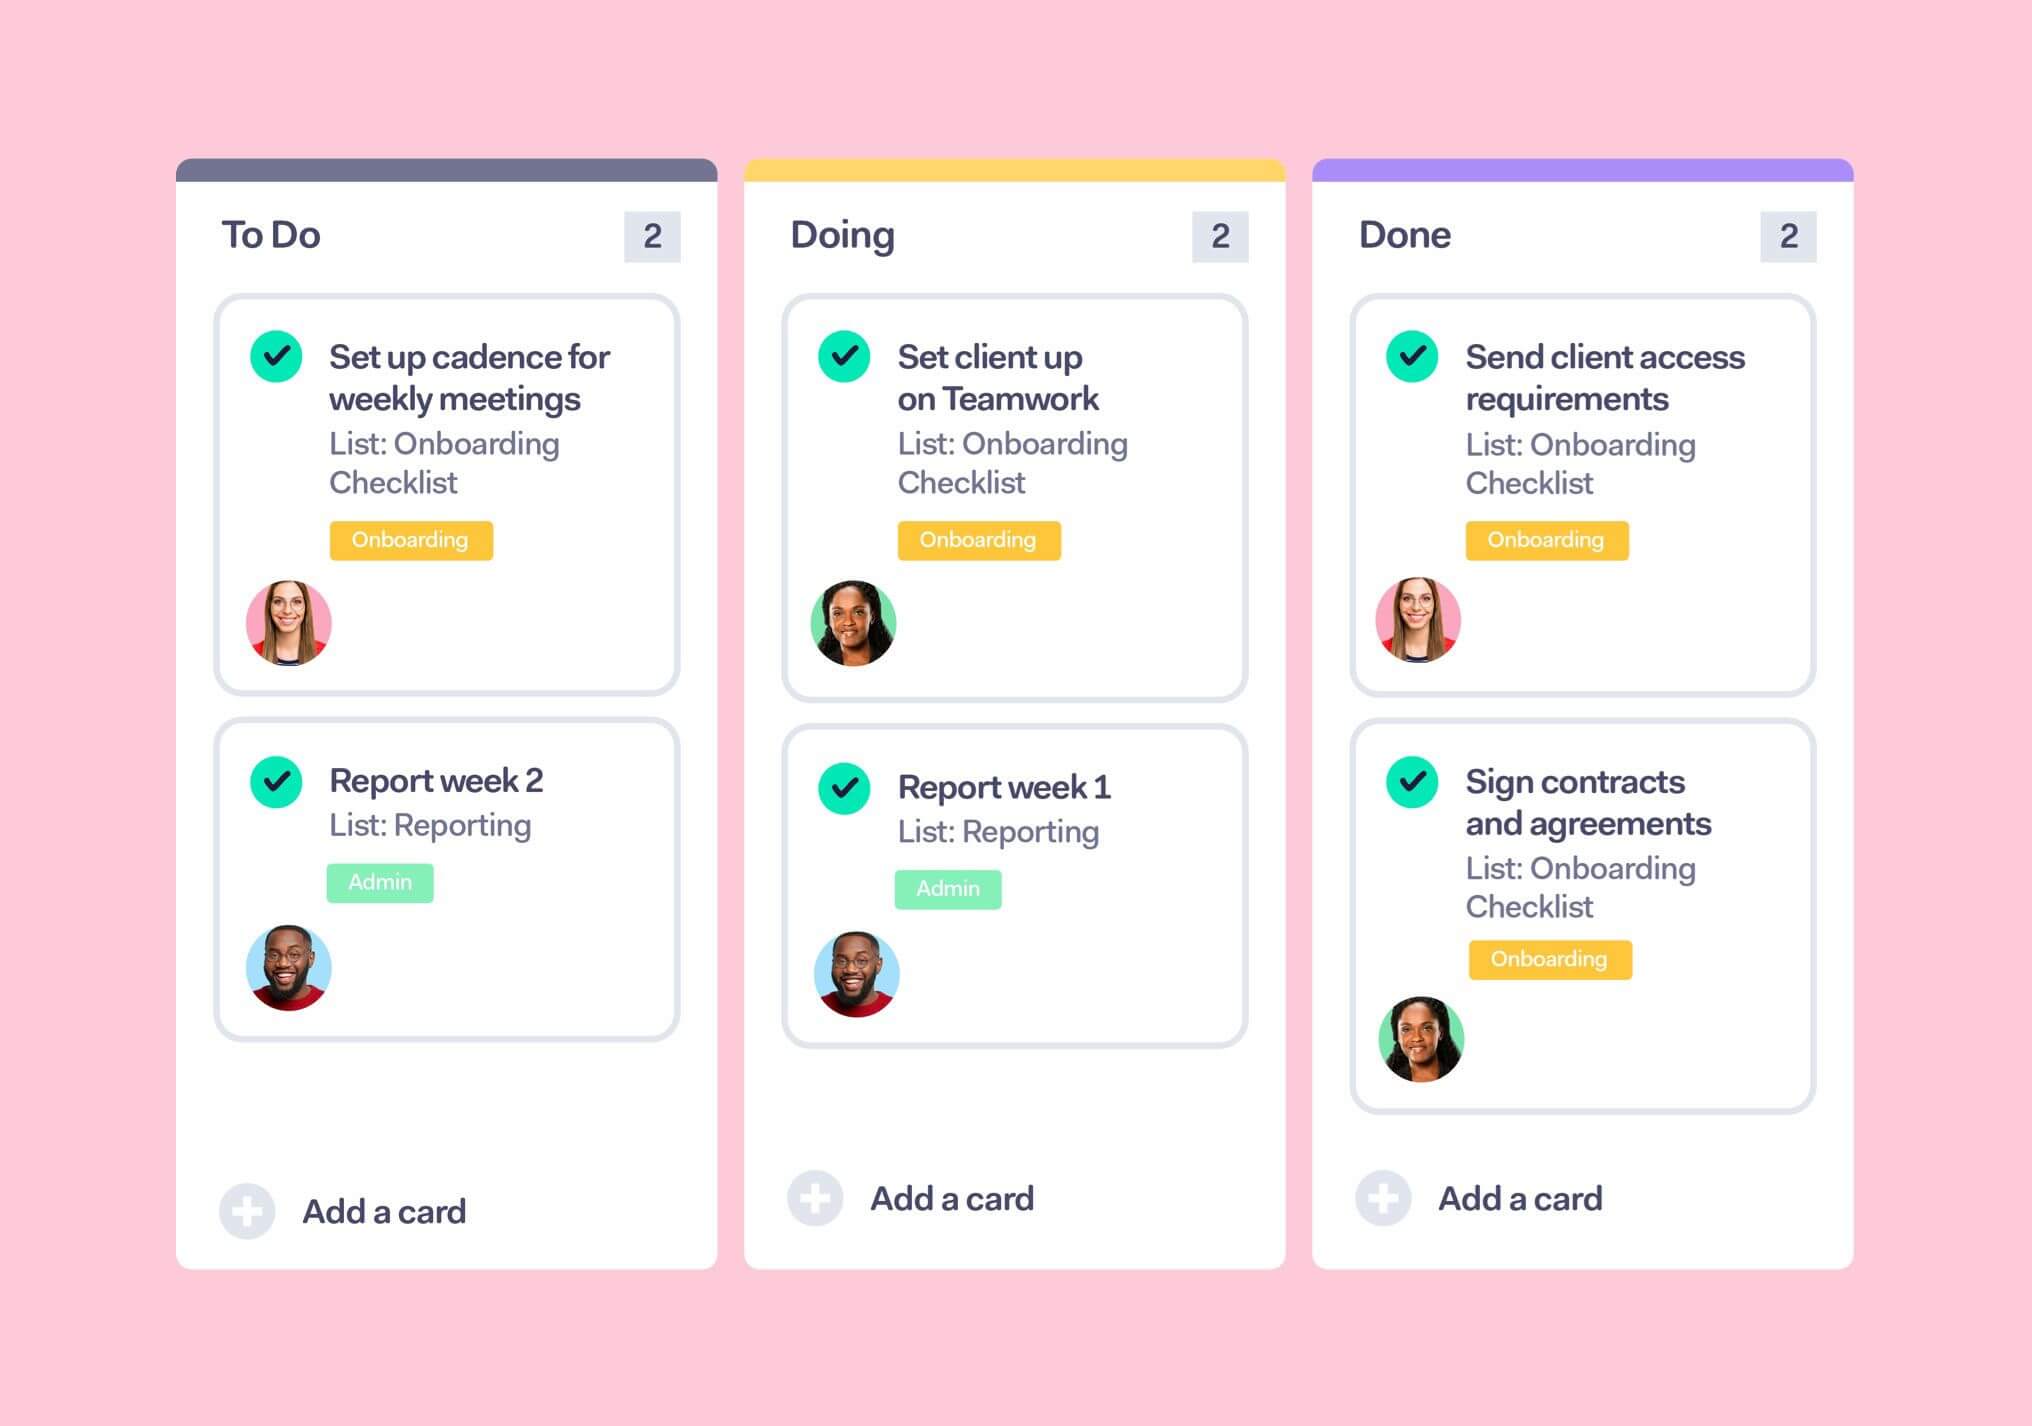 How to use our new client onboarding process template